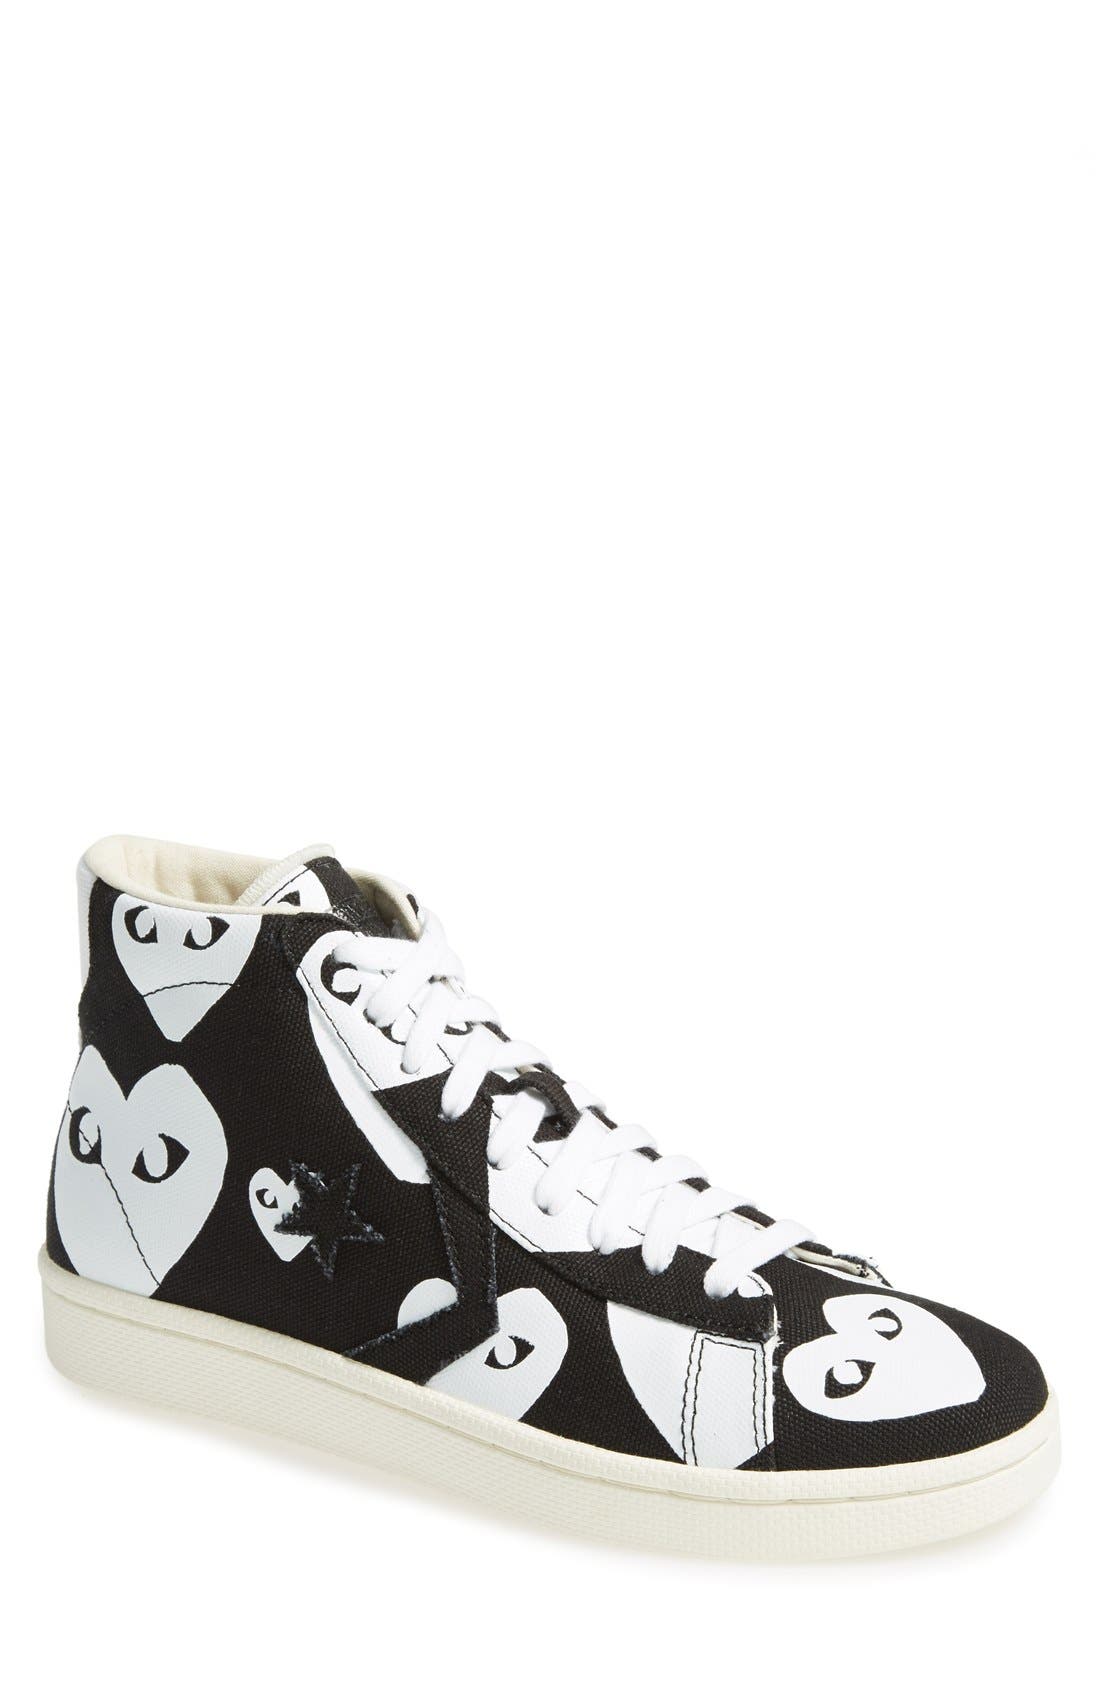 nordstrom converse play